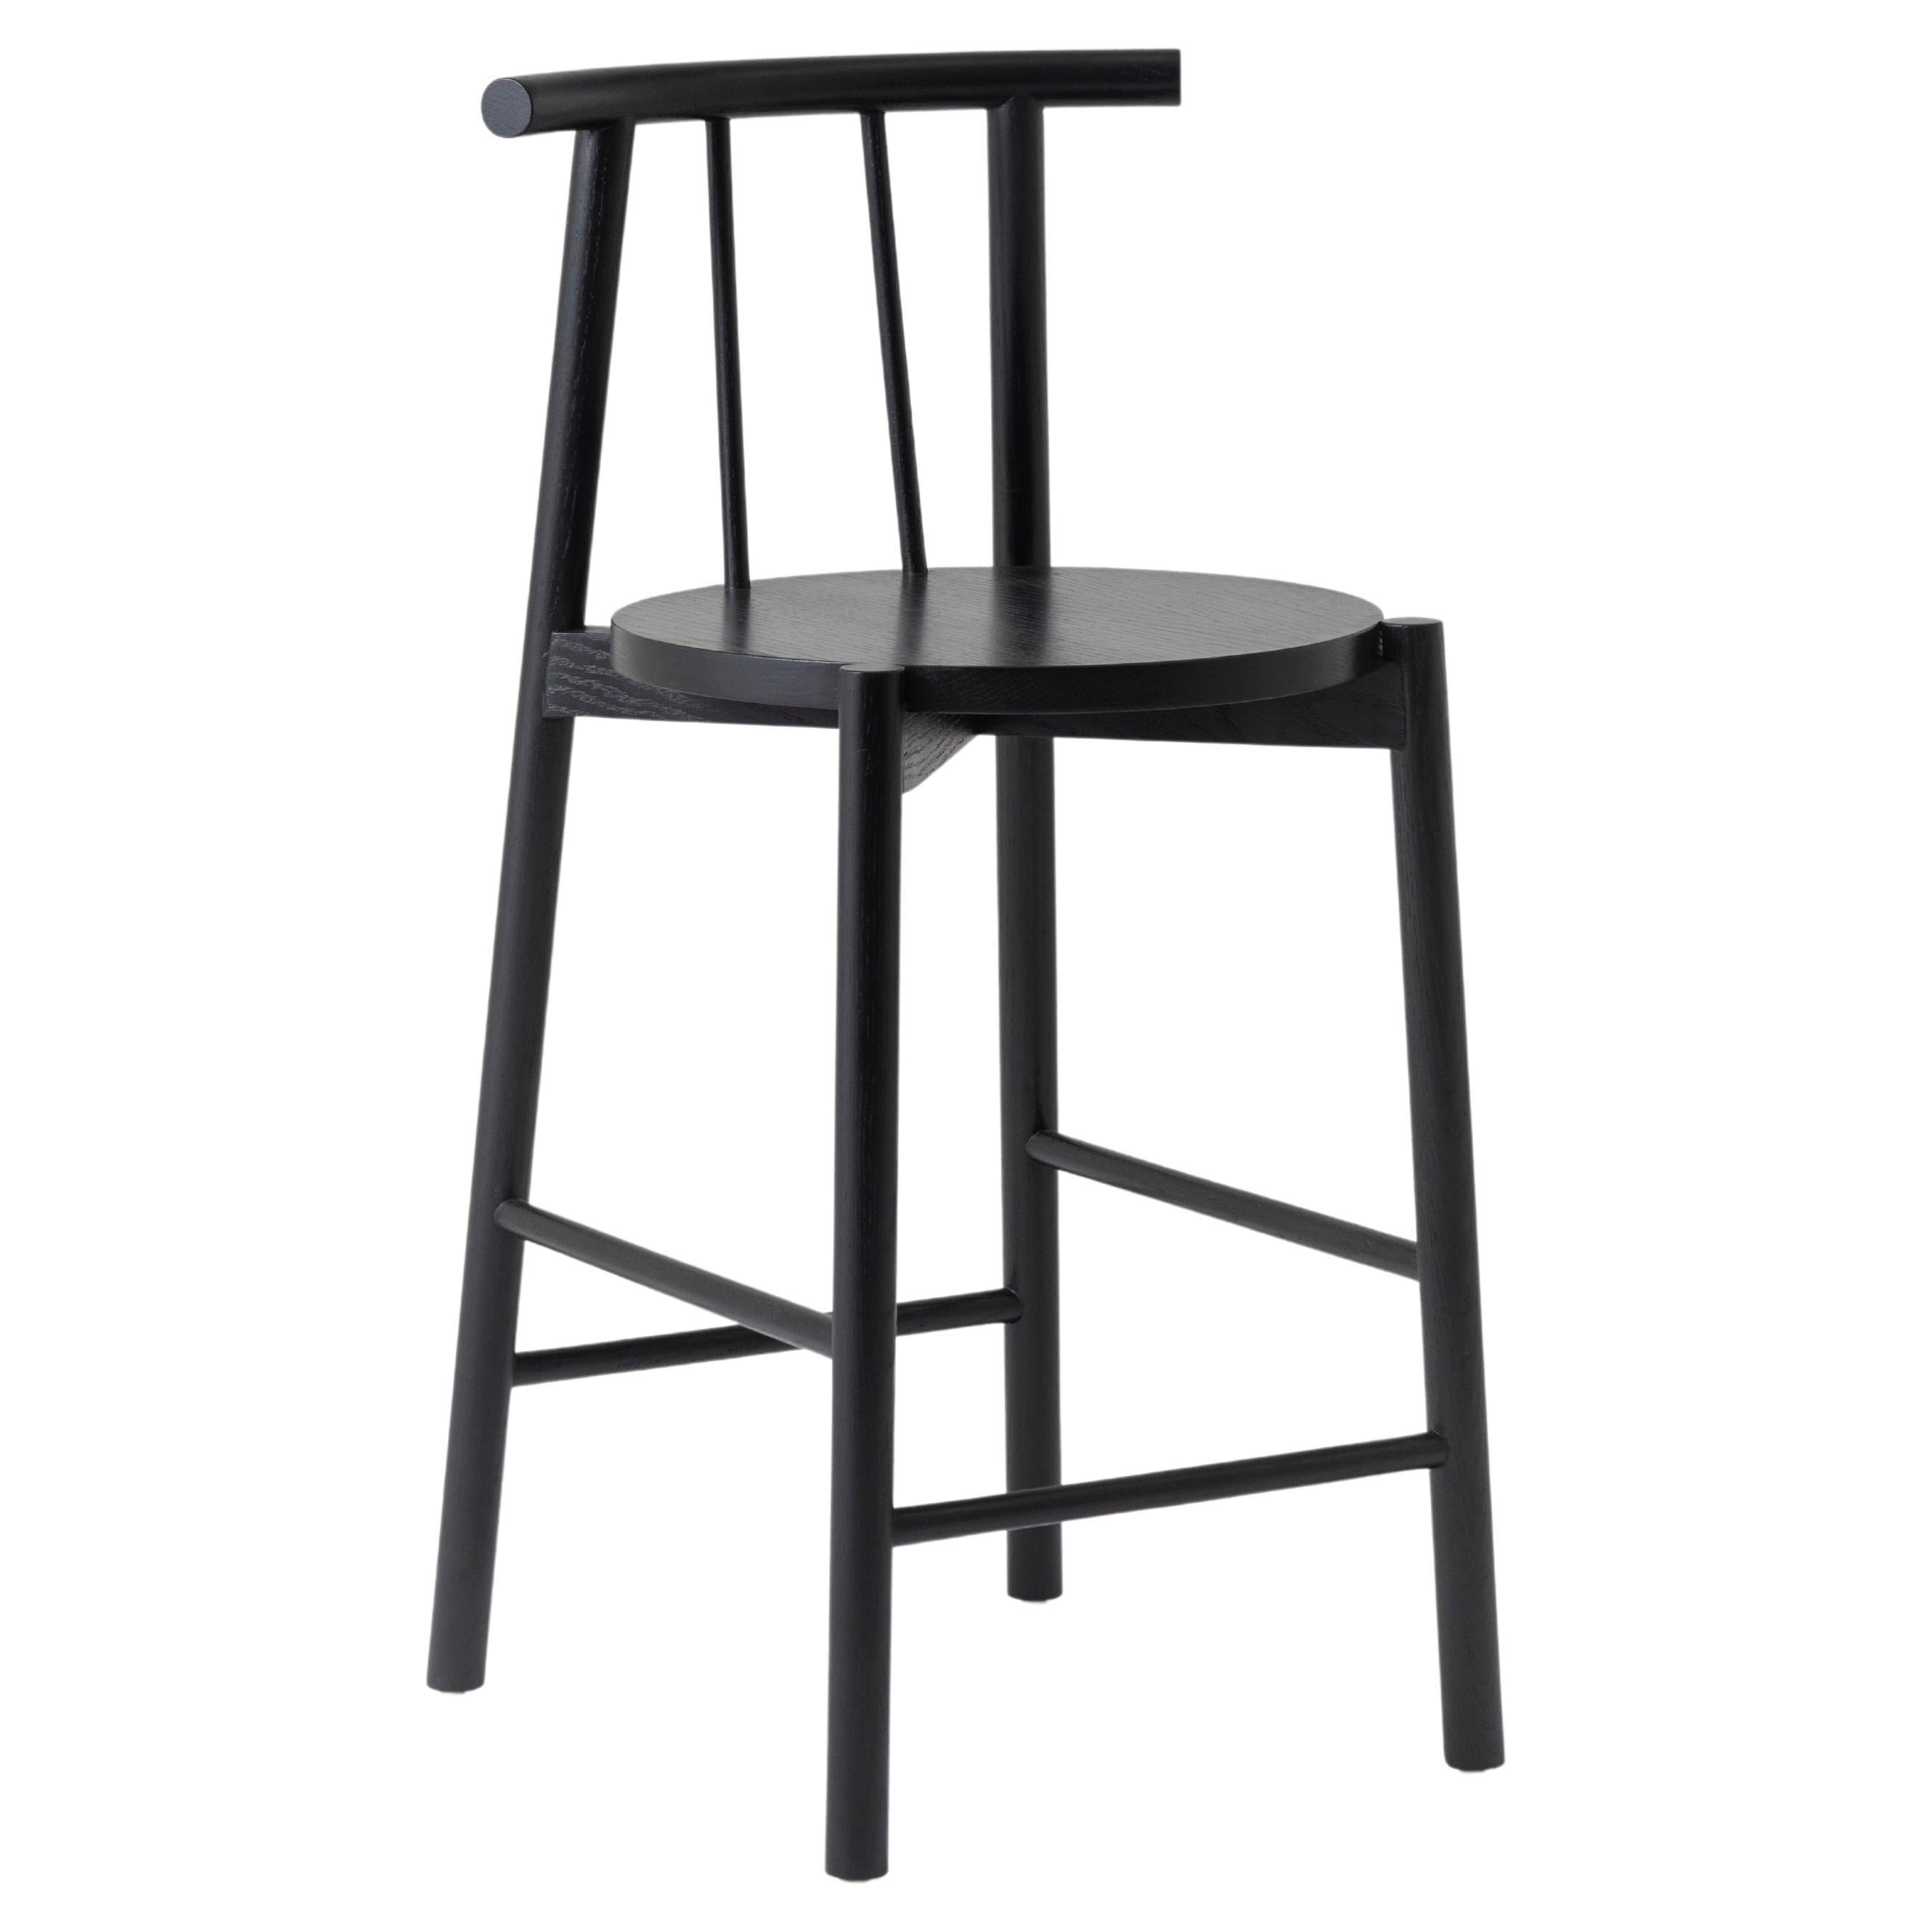 Black Stool Crafted in Solid Oak Wood For Sale